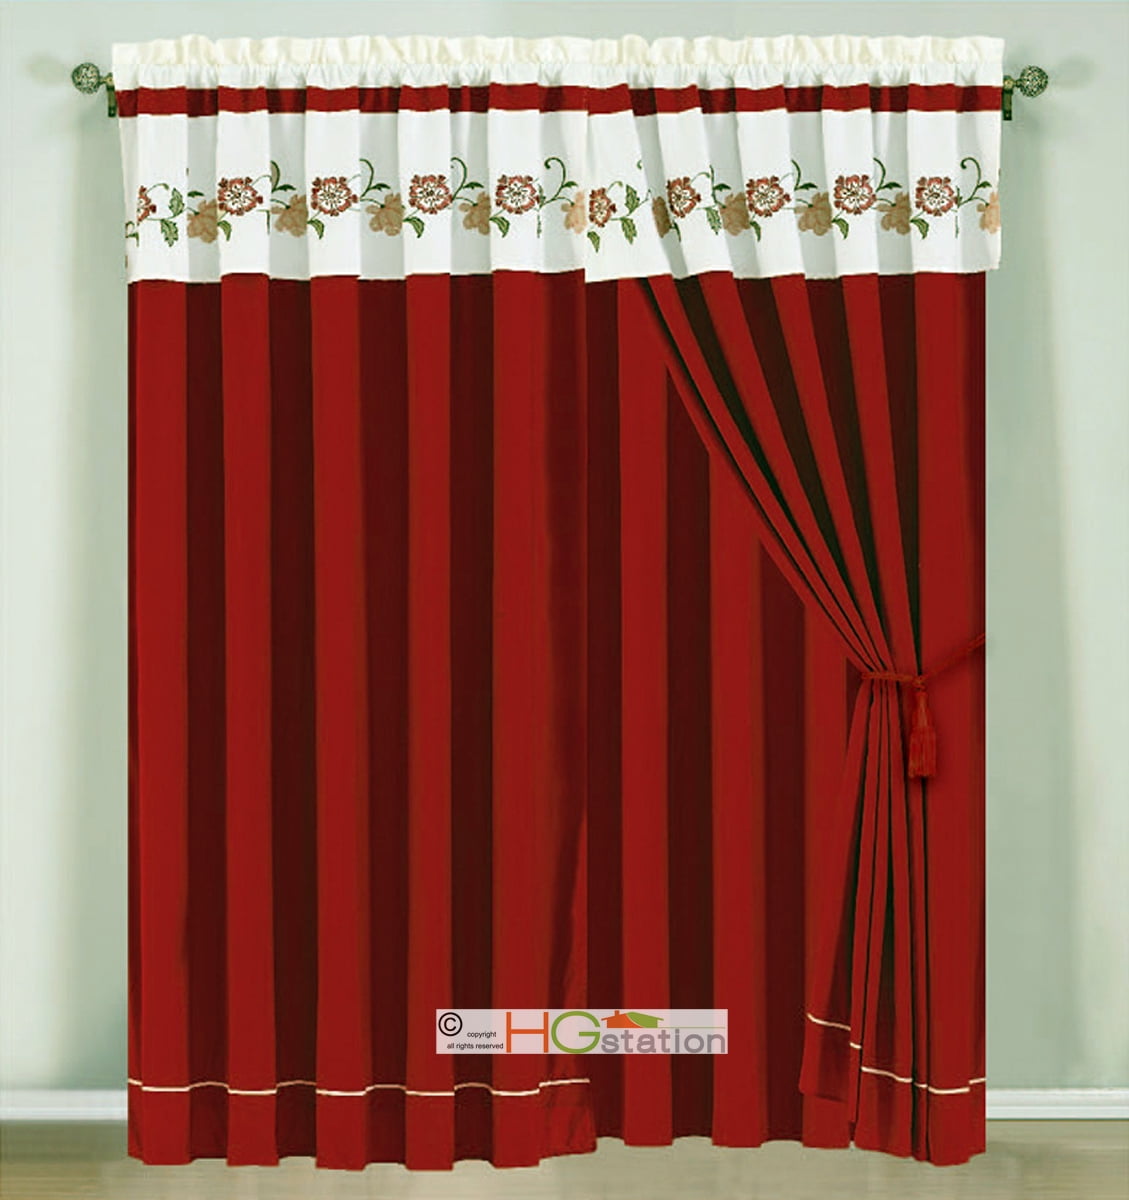 Details about   4-Pc Floral Blossom Vine Scroll Embroidery Curtain Set Ivory Red Drape Valance 